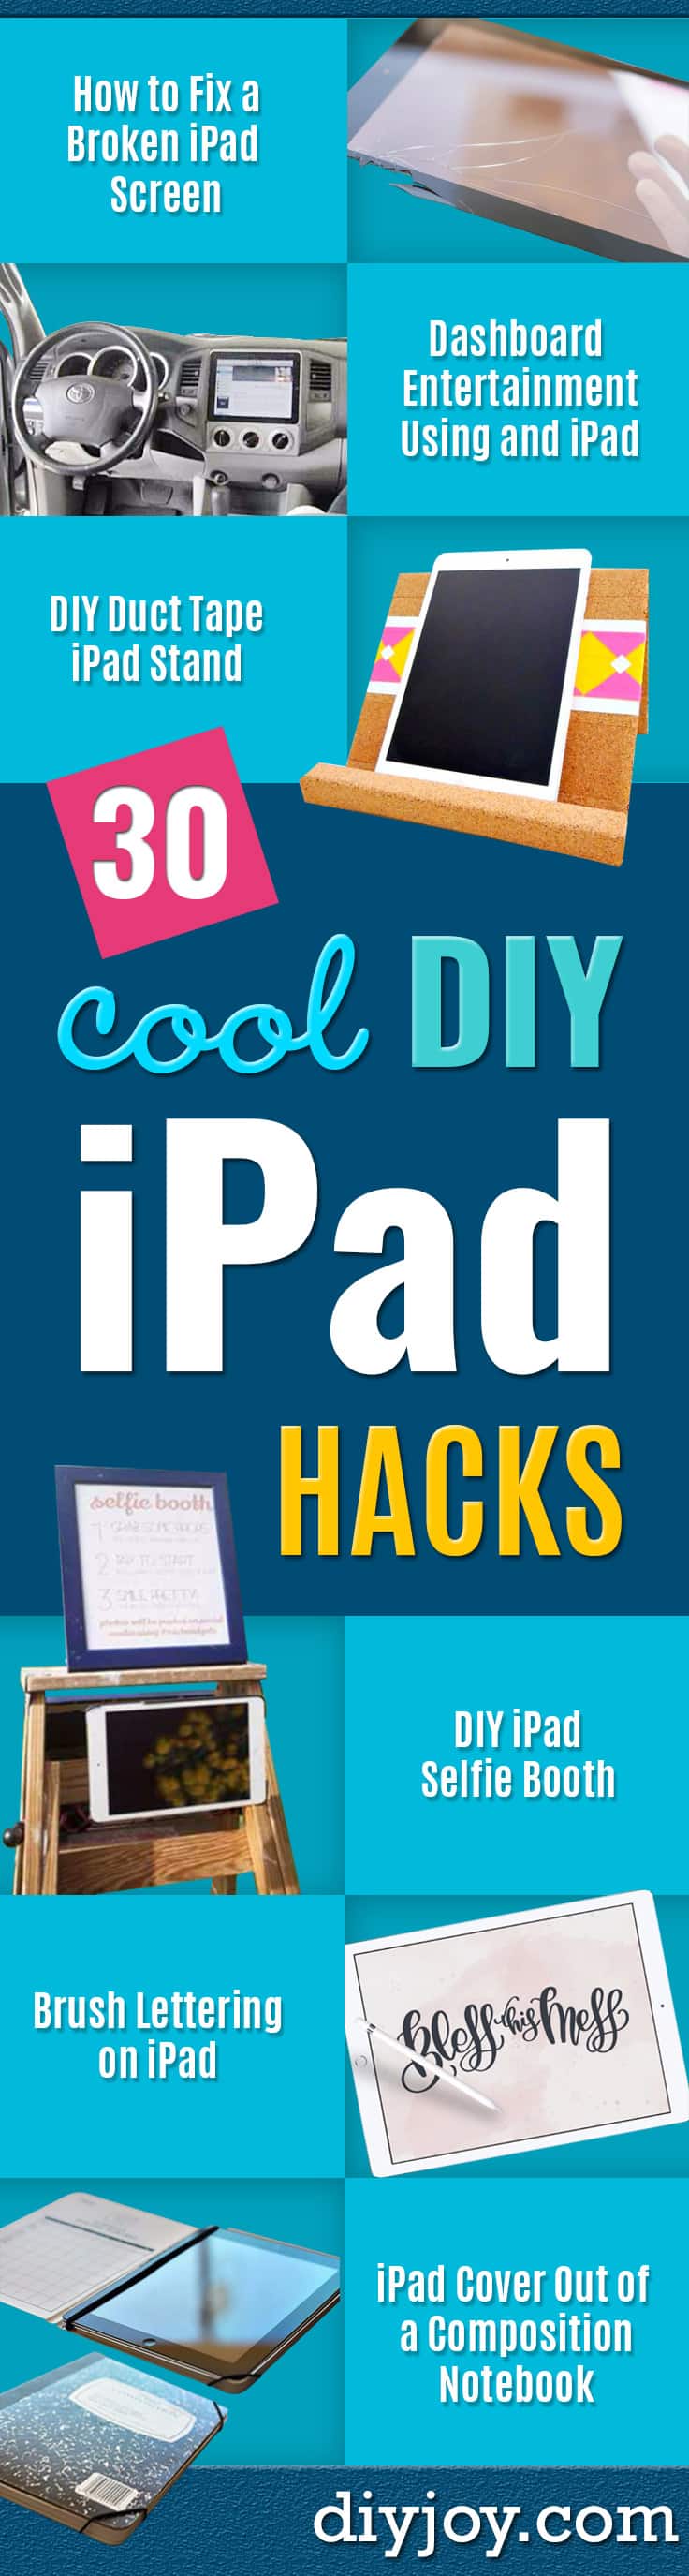 Best Ipad Tips and Tricks - Awesome Ideas for Ways To Use Your Ipad - Tutorials and Shortcuts, Cool Apps for Kids, Life Hacks - Fun Ways to Use Phones and Ipads - Productivity Tips and Hidden Technology Shortcut Tricks 